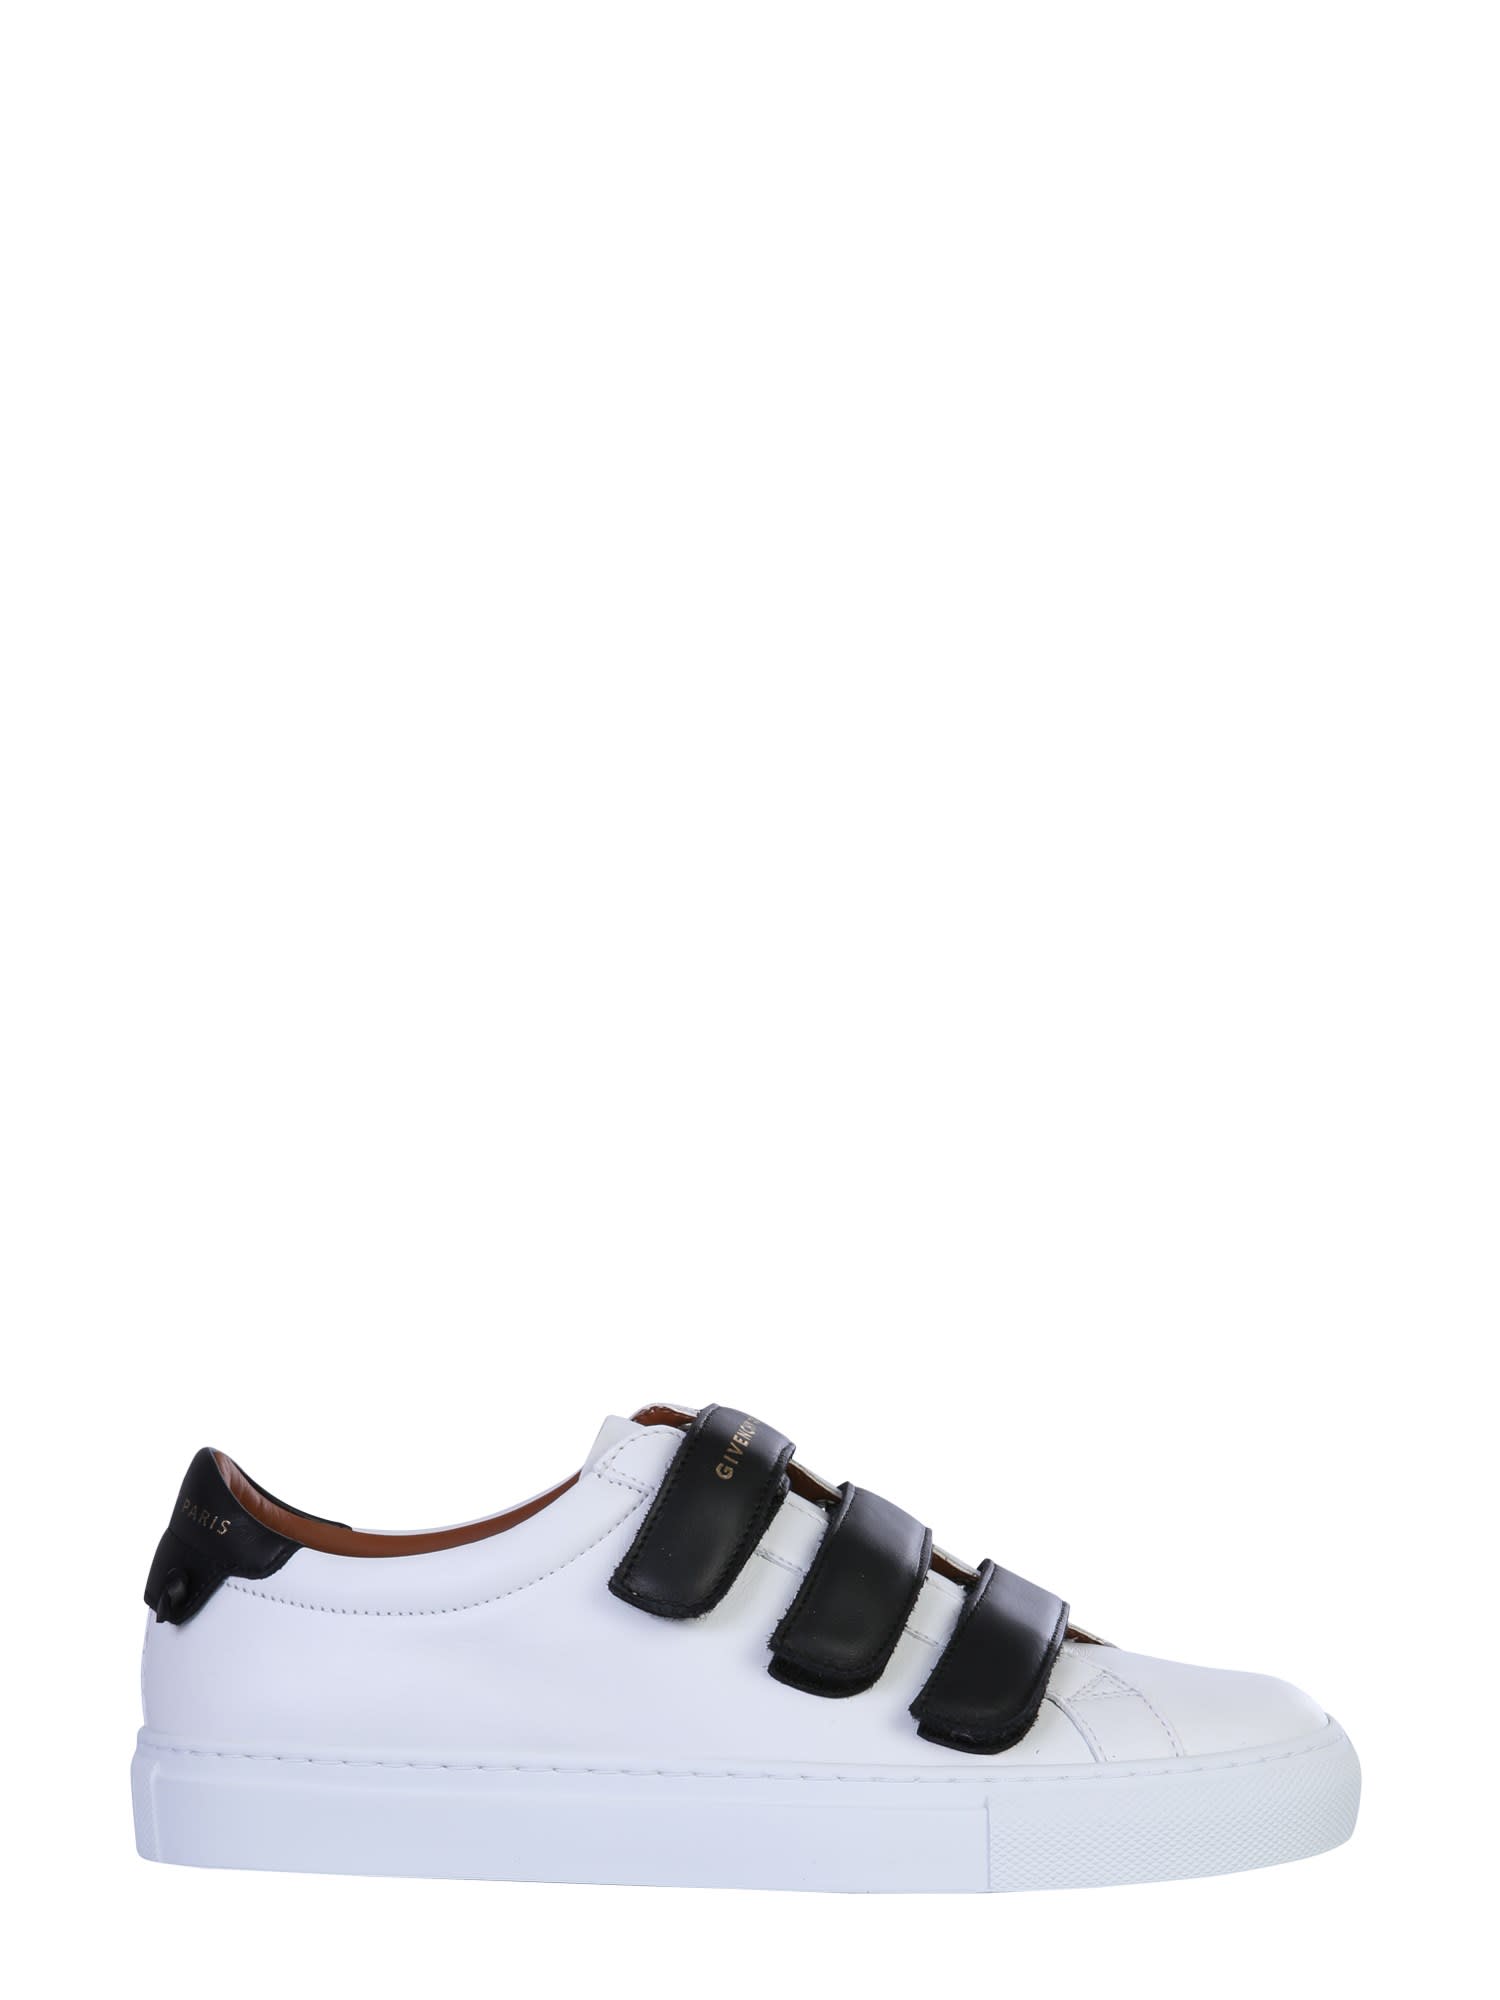 GIVENCHY URBAN STREET SNEAKERS,11317758